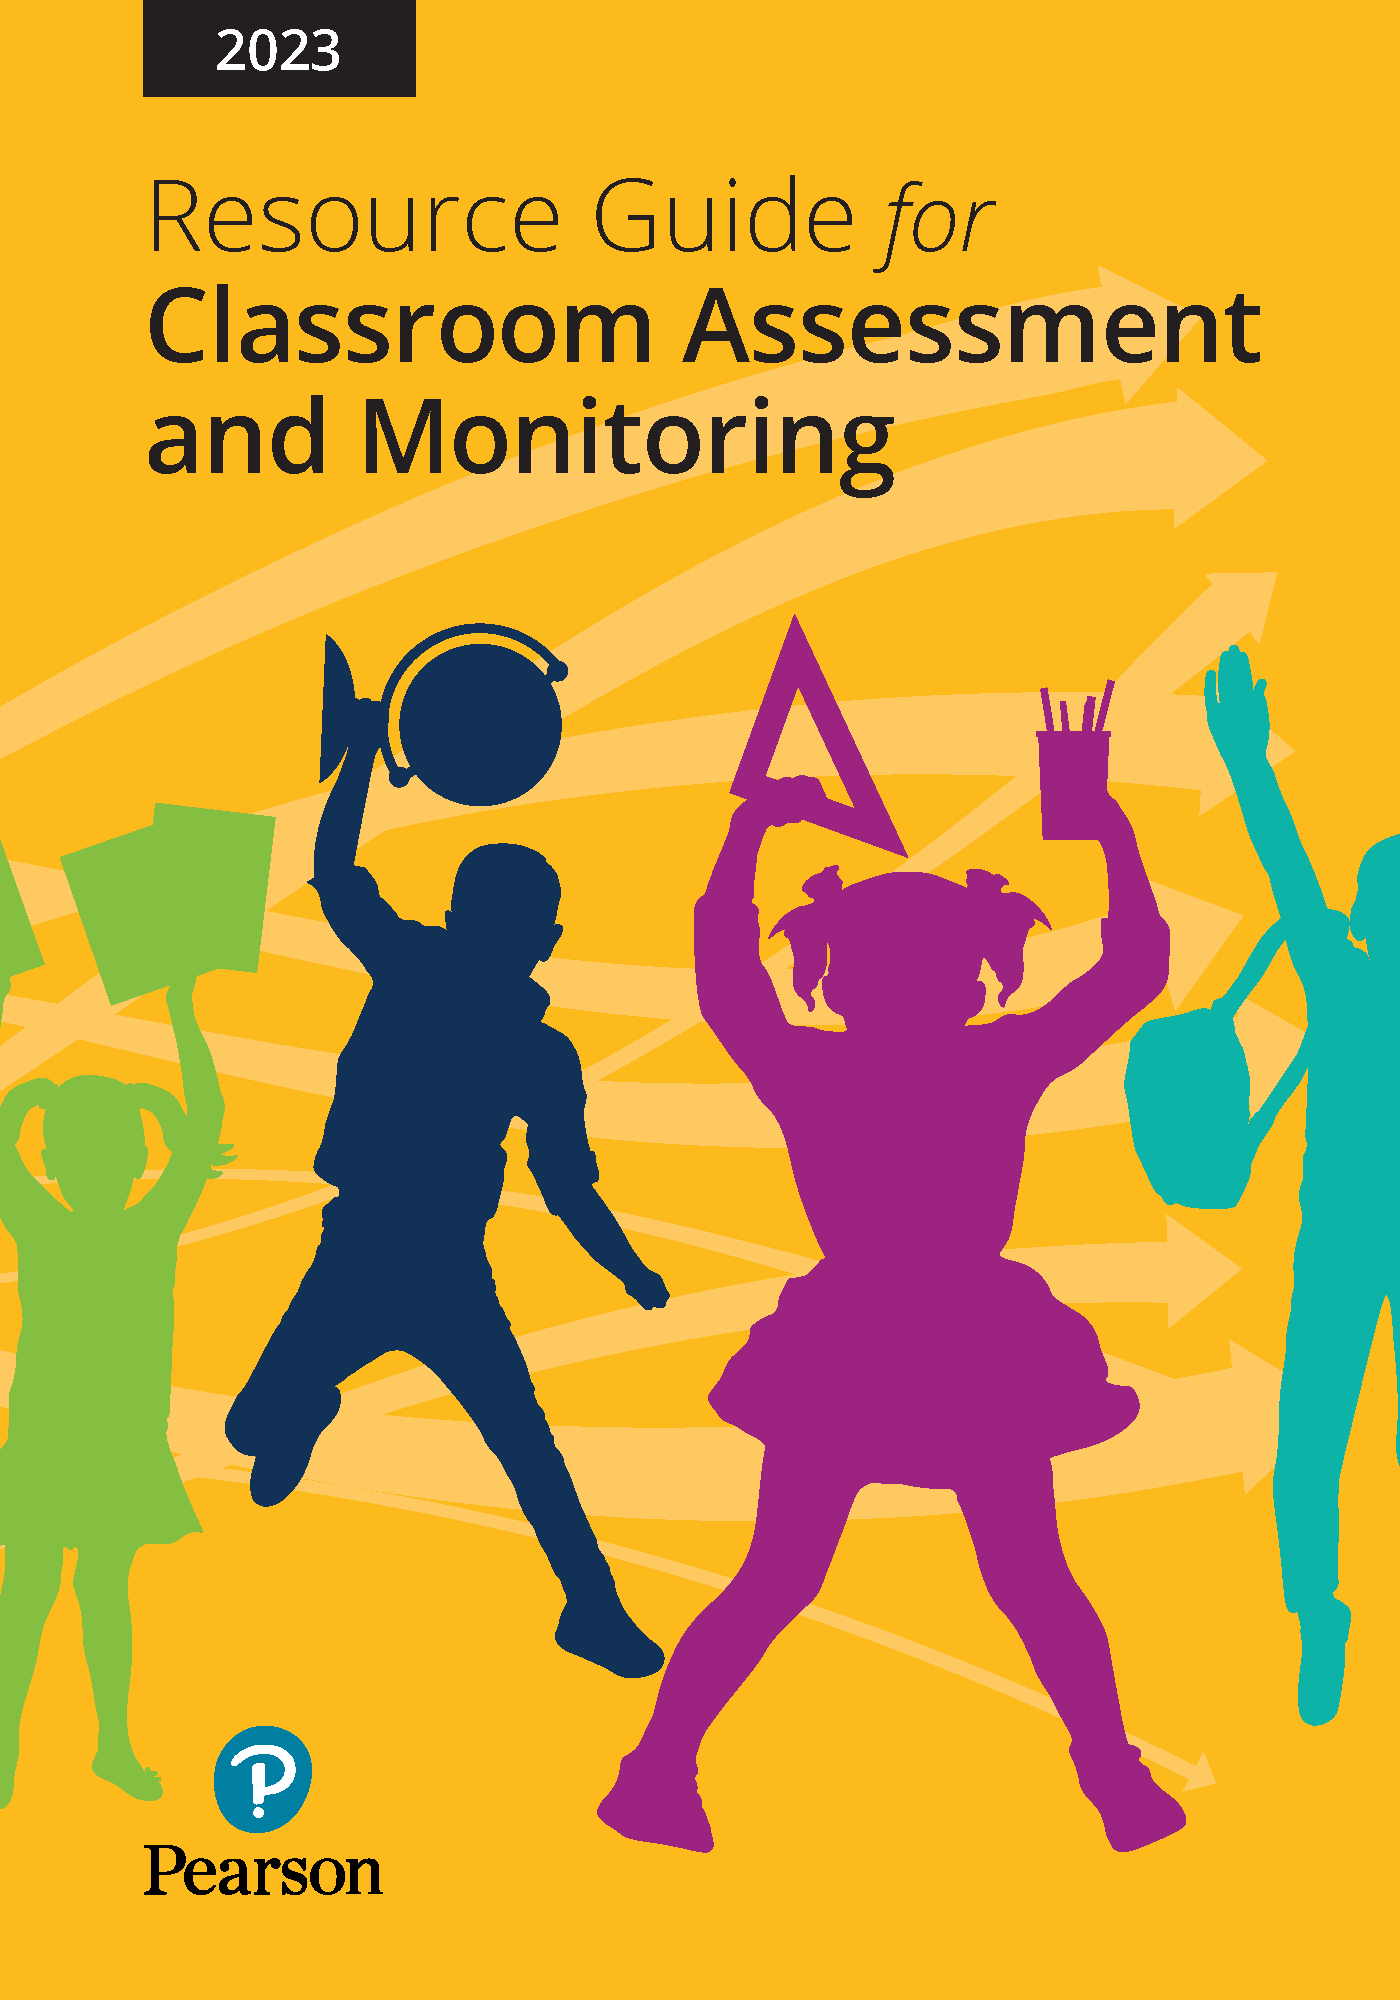 2023 Resource Guide for Classroom Assessment and Monitoring